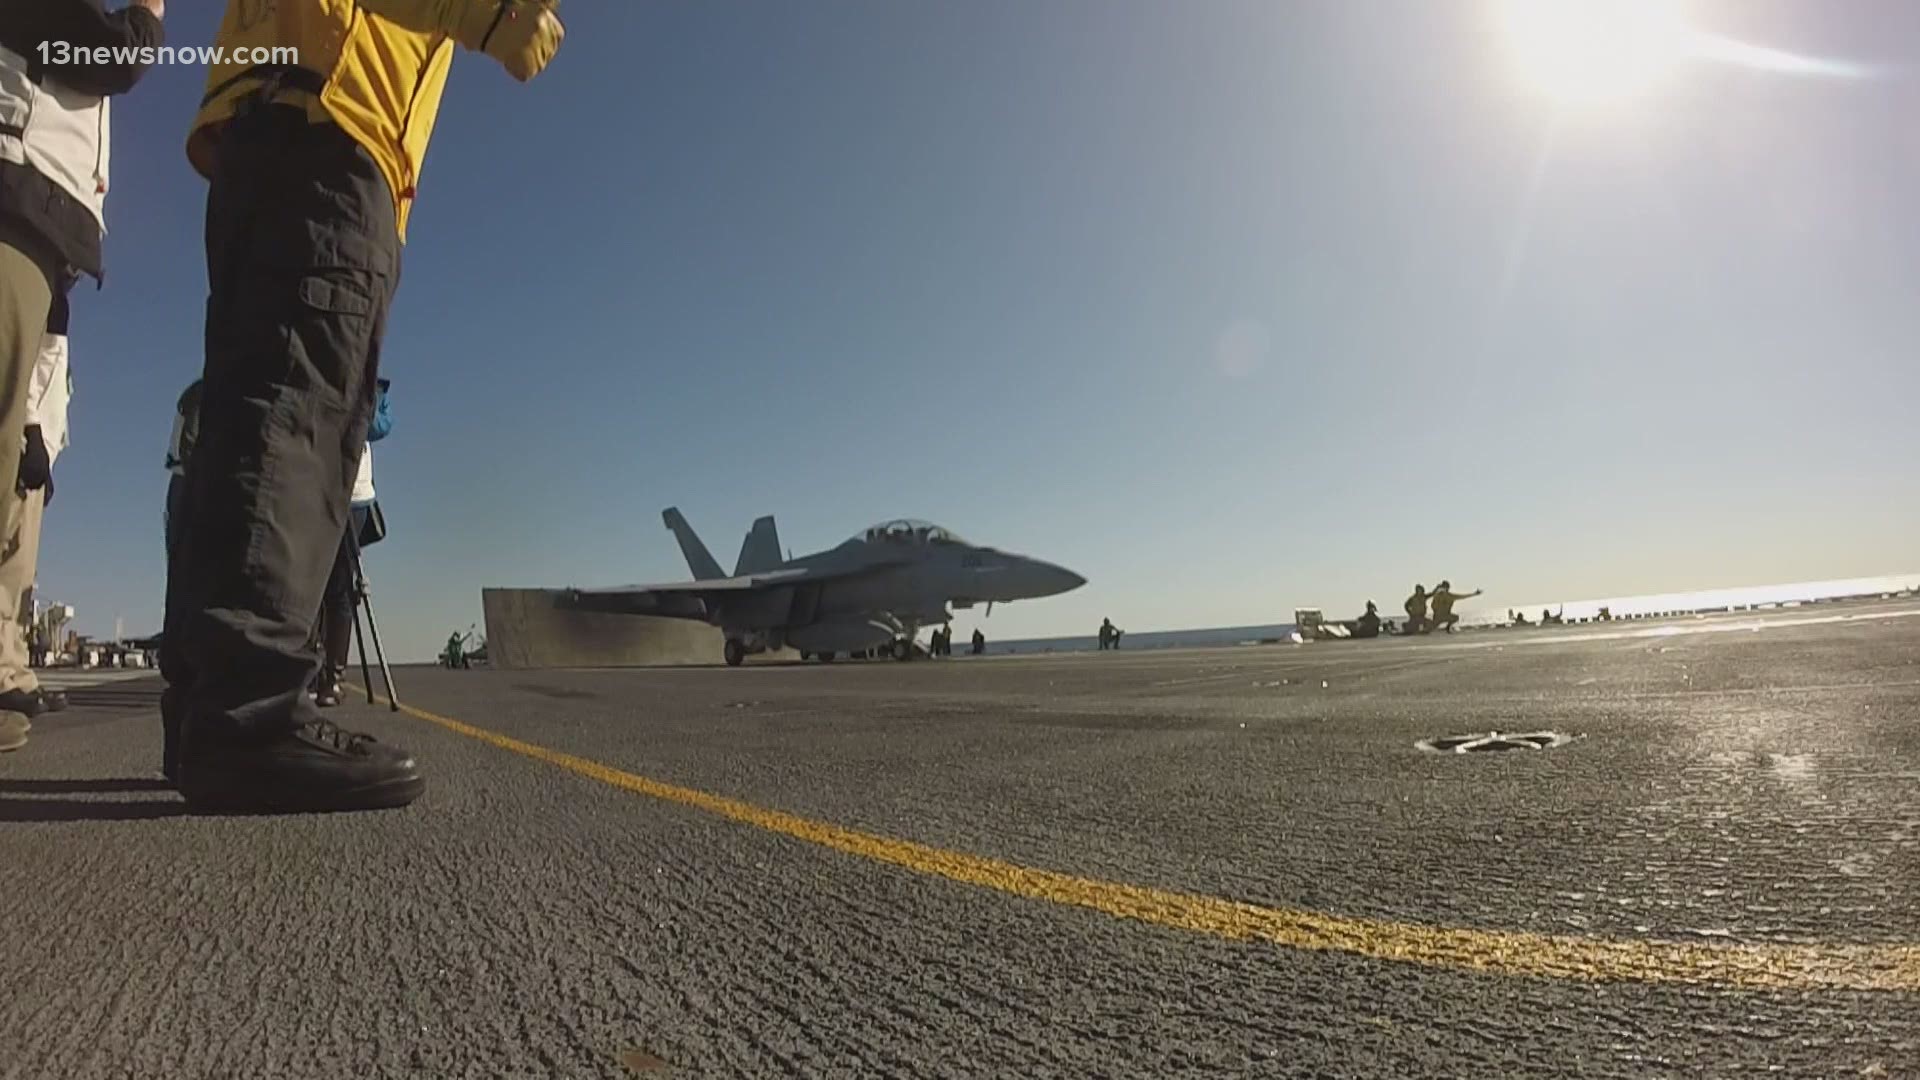 Every takeoff aboard USS Gerald R. Ford is the sound of the US Navy's new path forward.